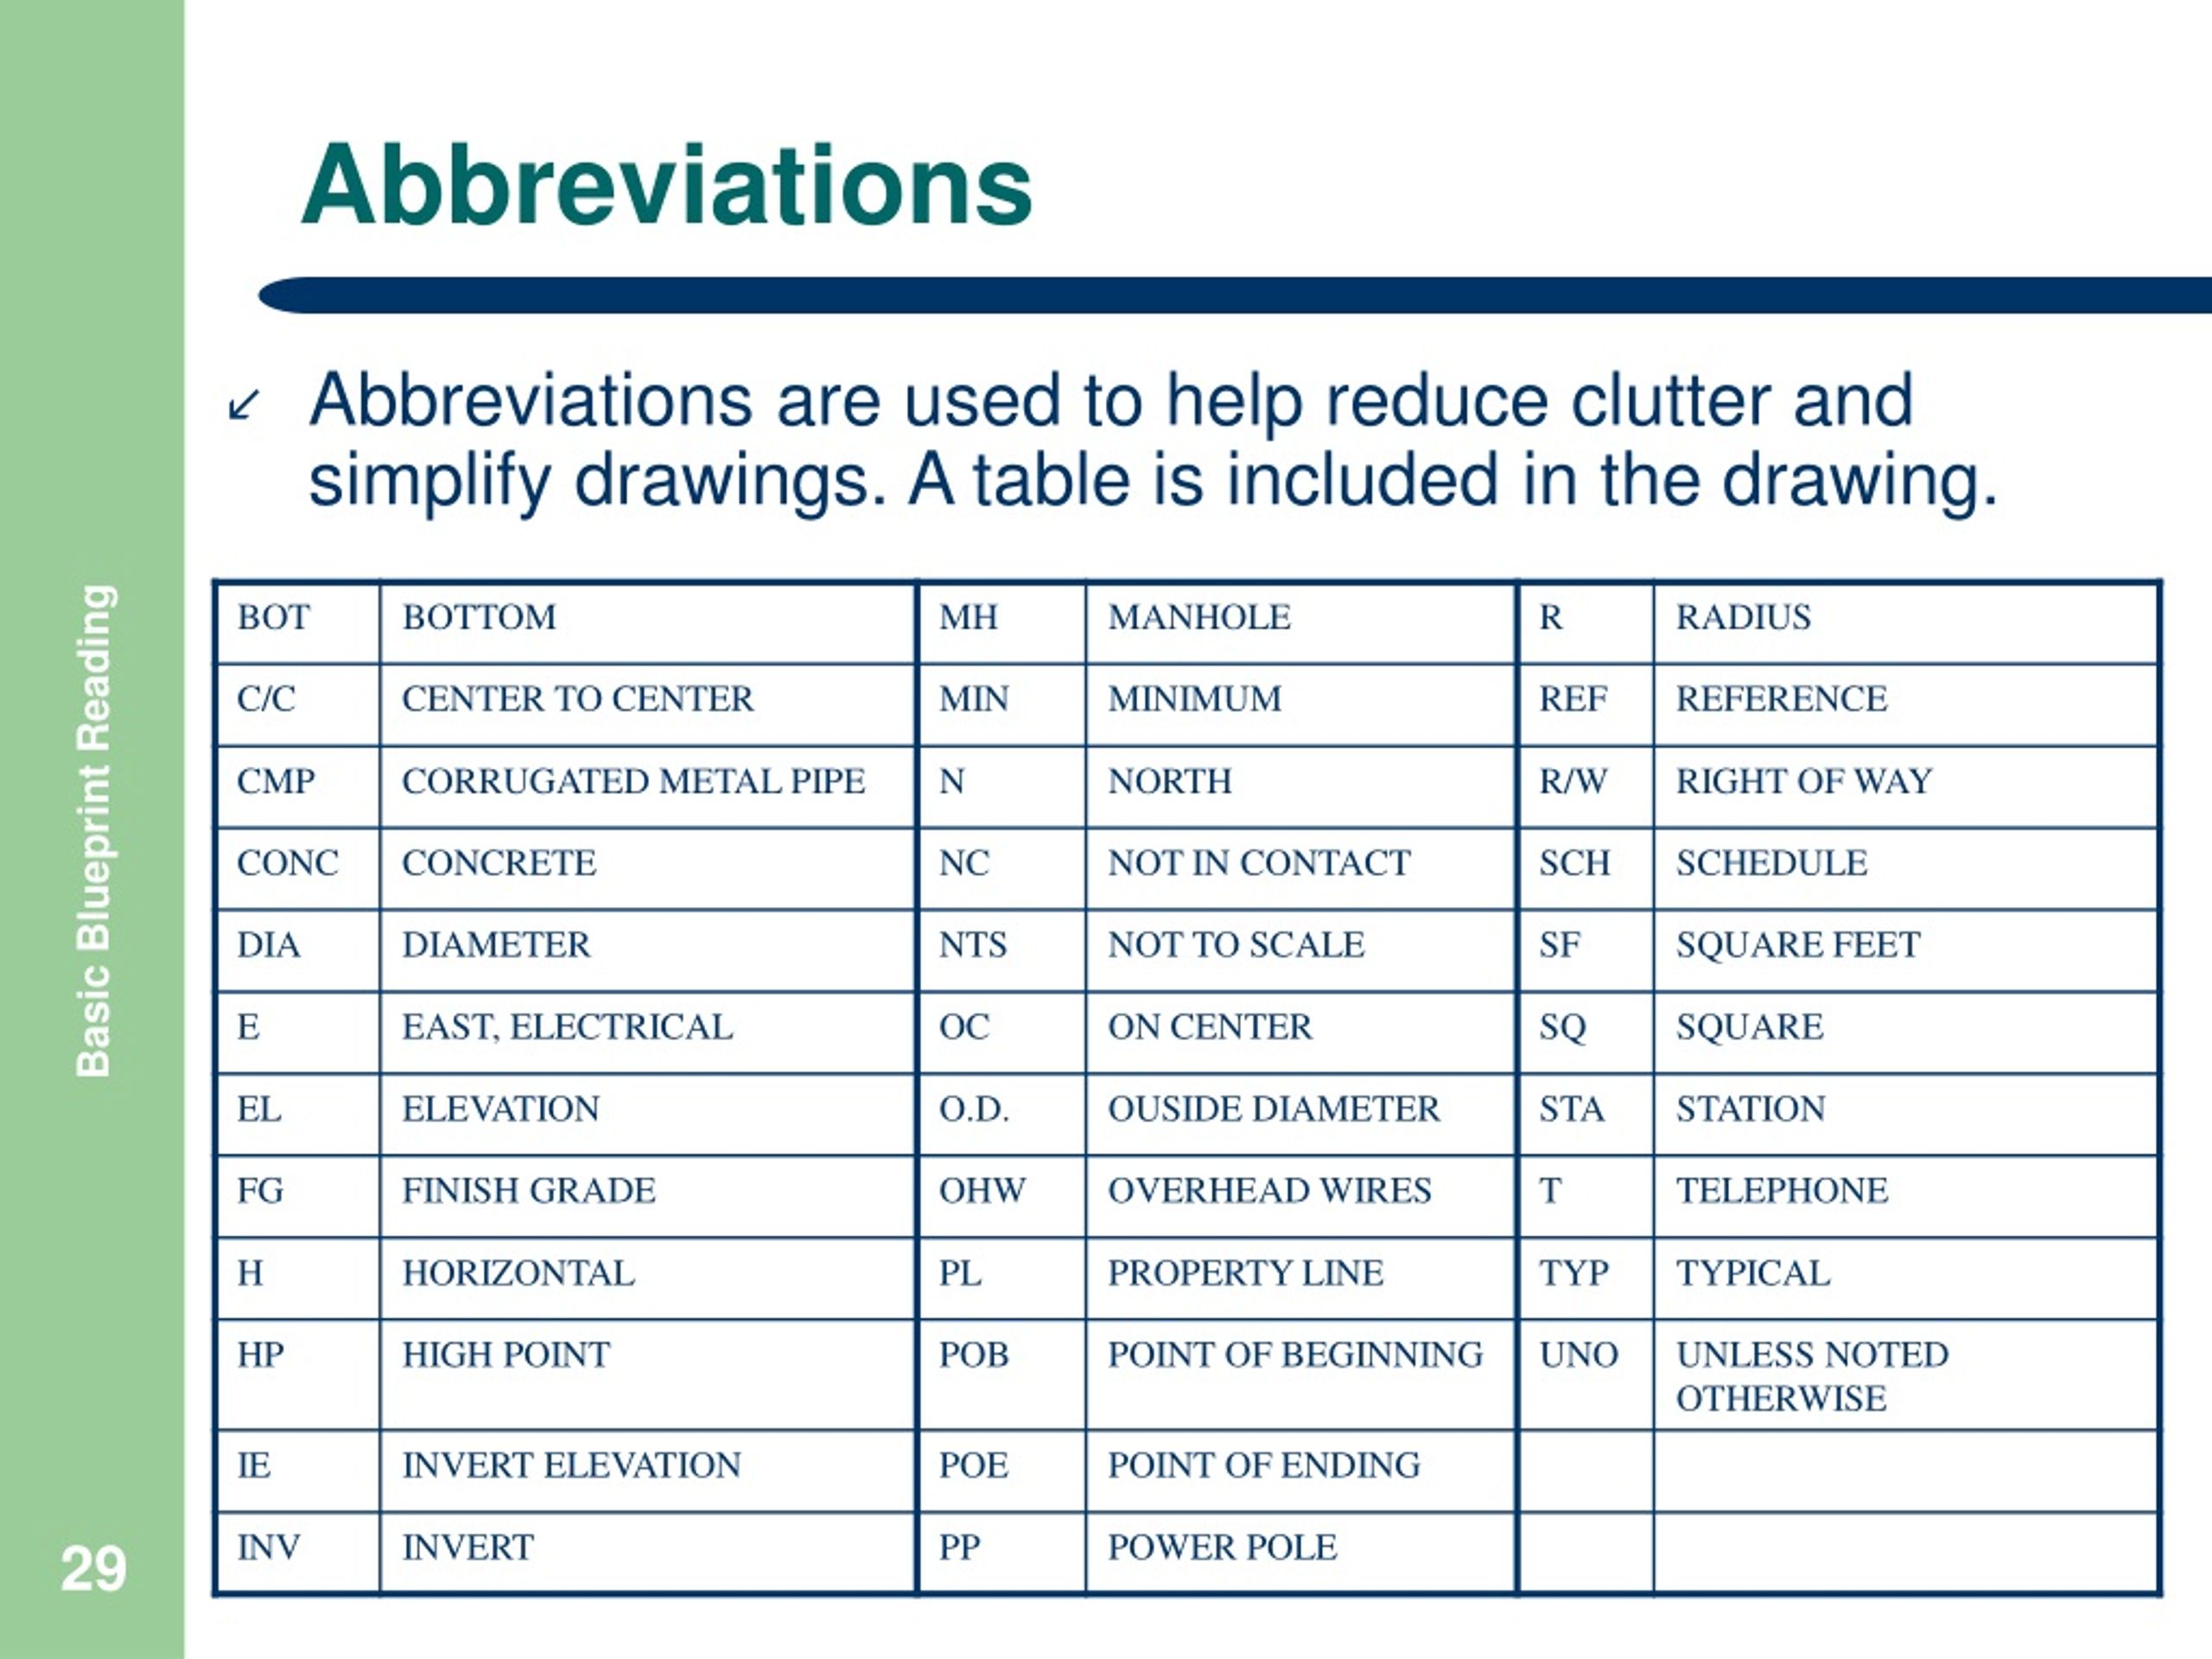 assignment for abbreviation